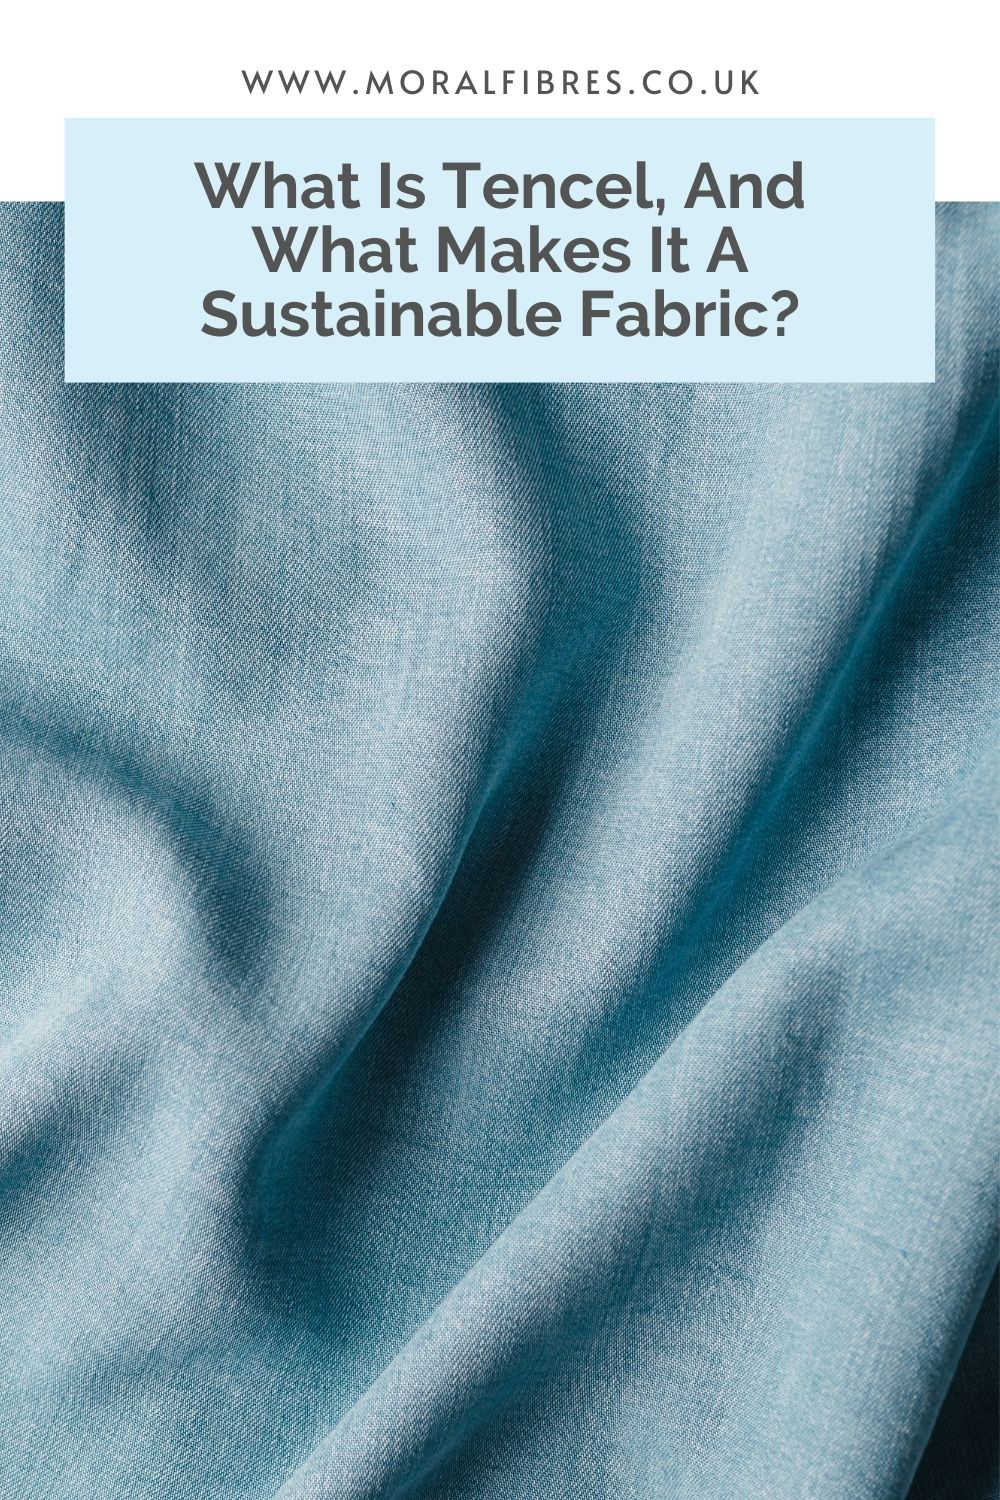 Blue fabric, with a blue text box that says what is Tencel, and what makes it a sustainable fabric?